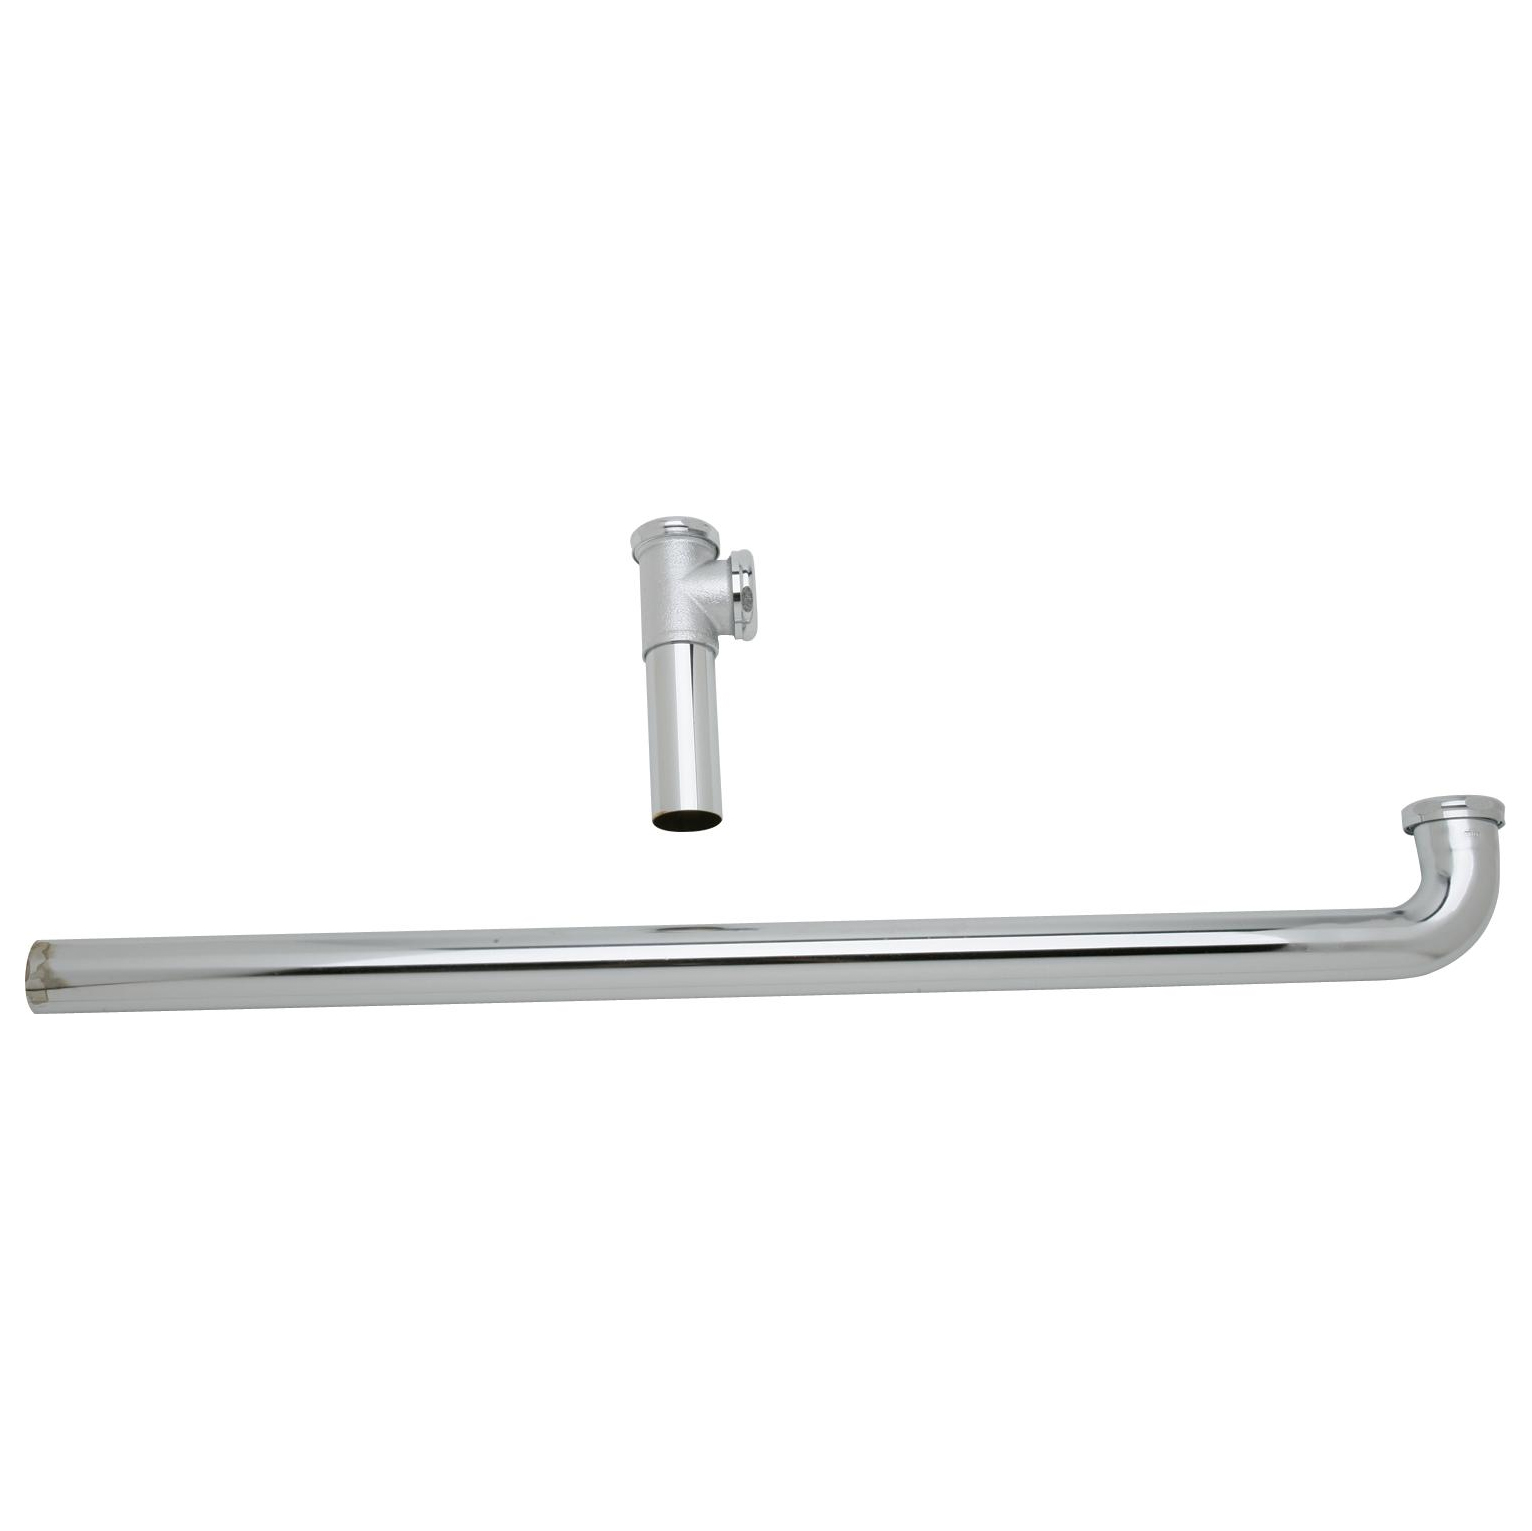 Elkay Drain Fitting End Outlet for Double Bowl Sinks